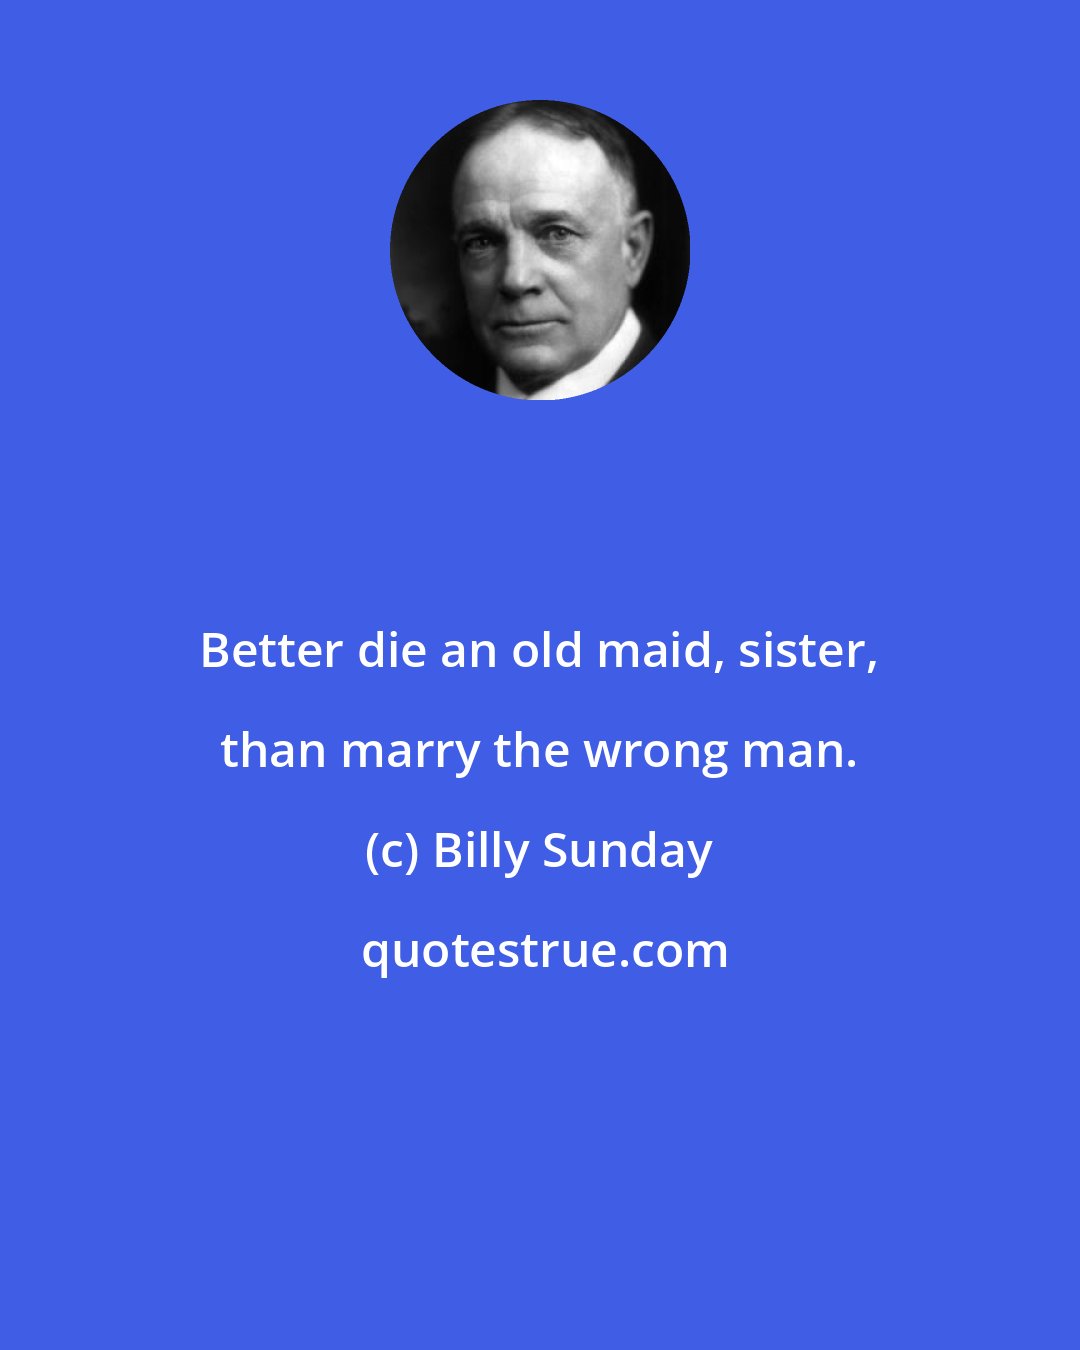 Billy Sunday: Better die an old maid, sister, than marry the wrong man.